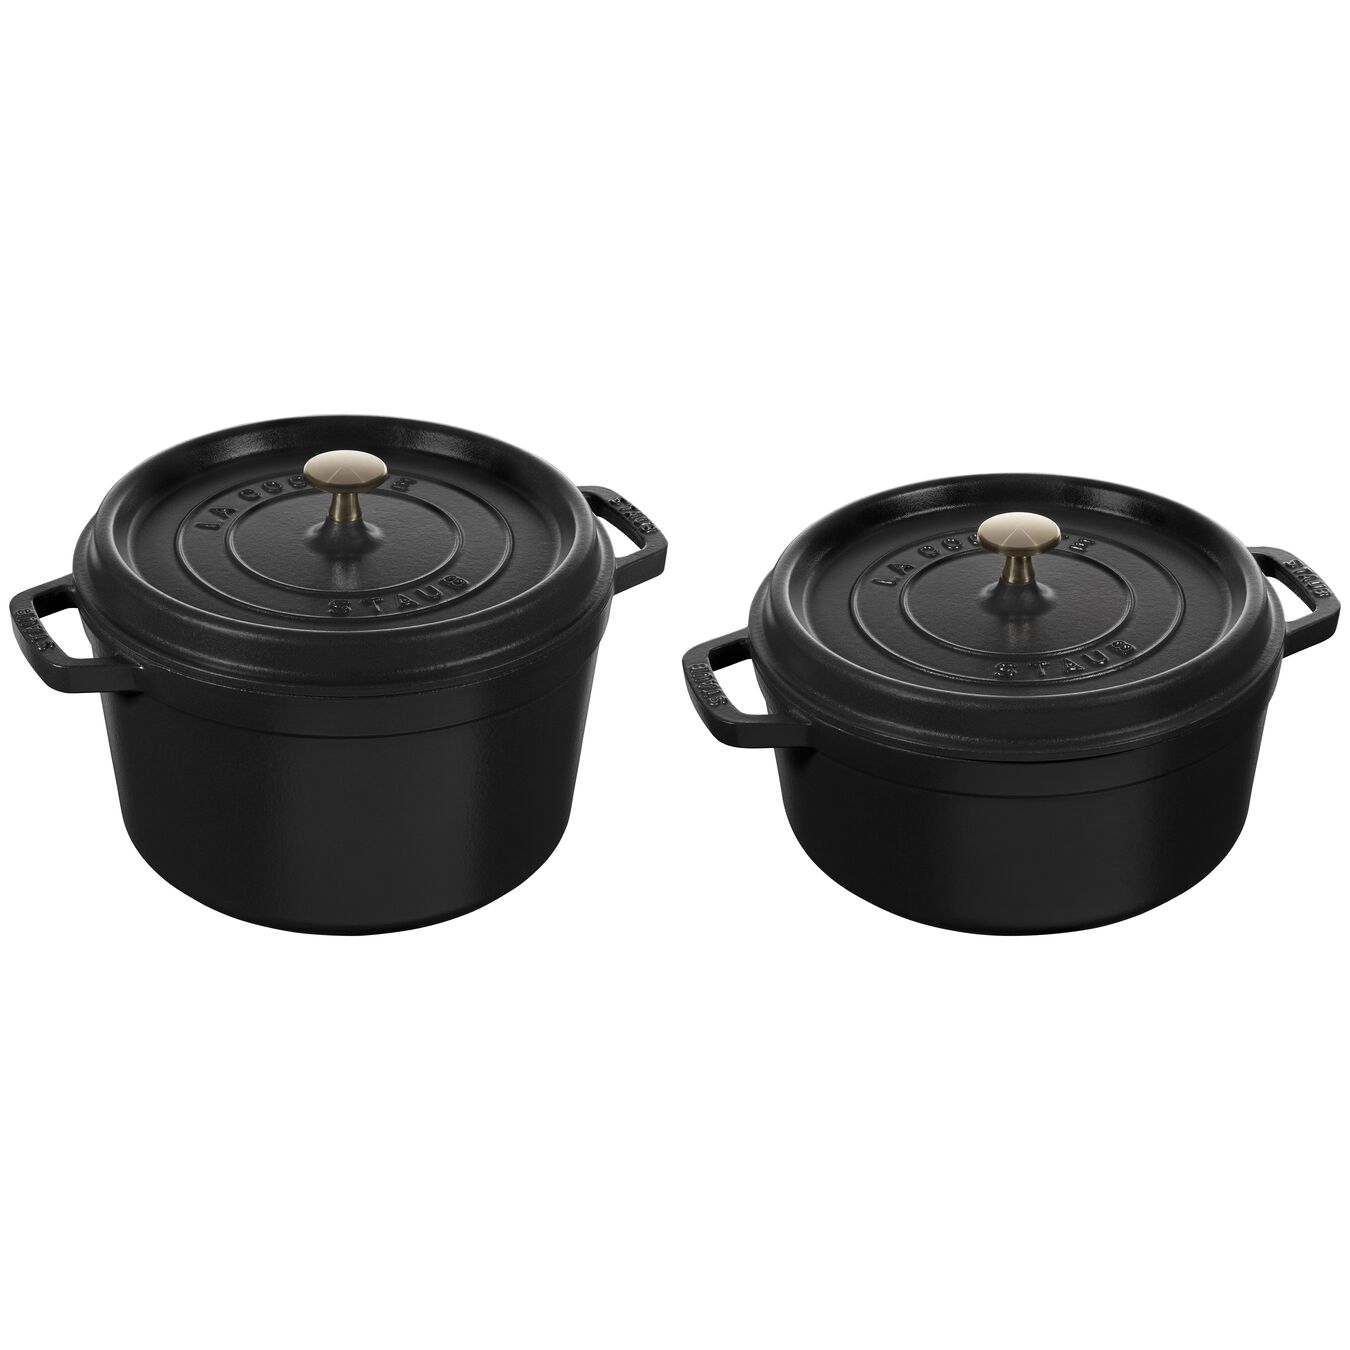 4.75 l cast iron round Tall cocotte, black - Visual Imperfections,,large 7